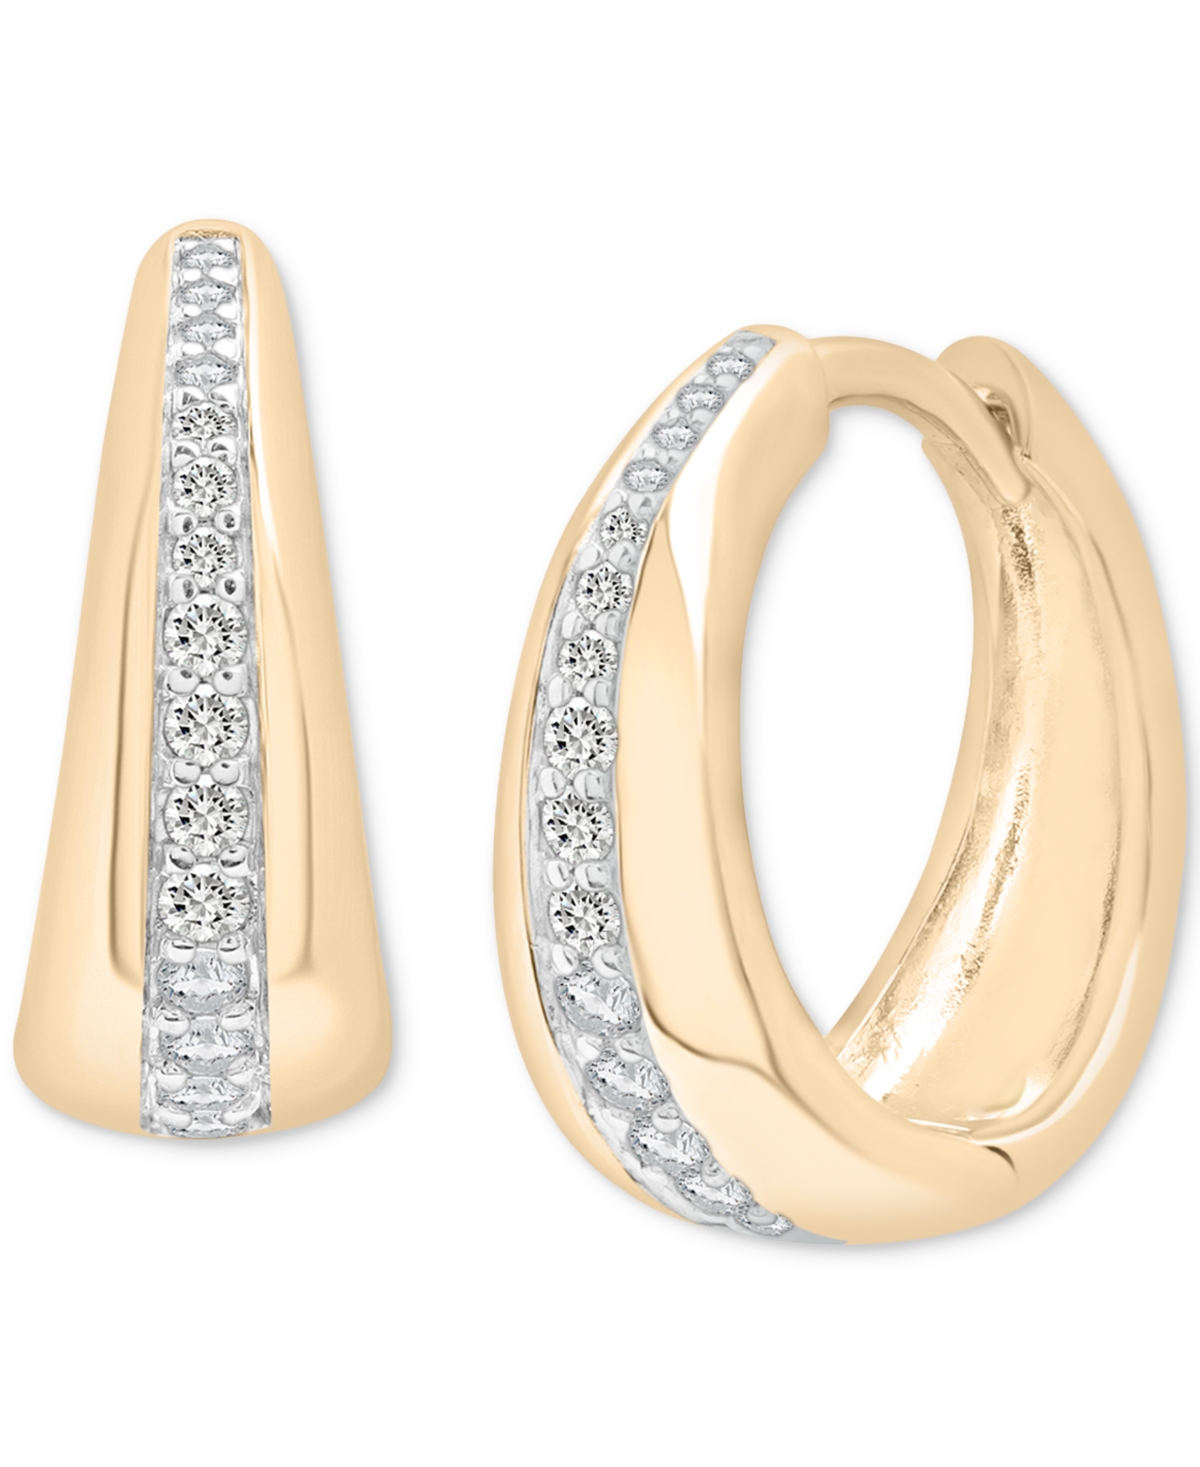 Diamond Tapered Extra Small Hoop Earrings (1/4 ct. t.w.) in Gold Vermeil, Created for Macy's - Gold Vermeil